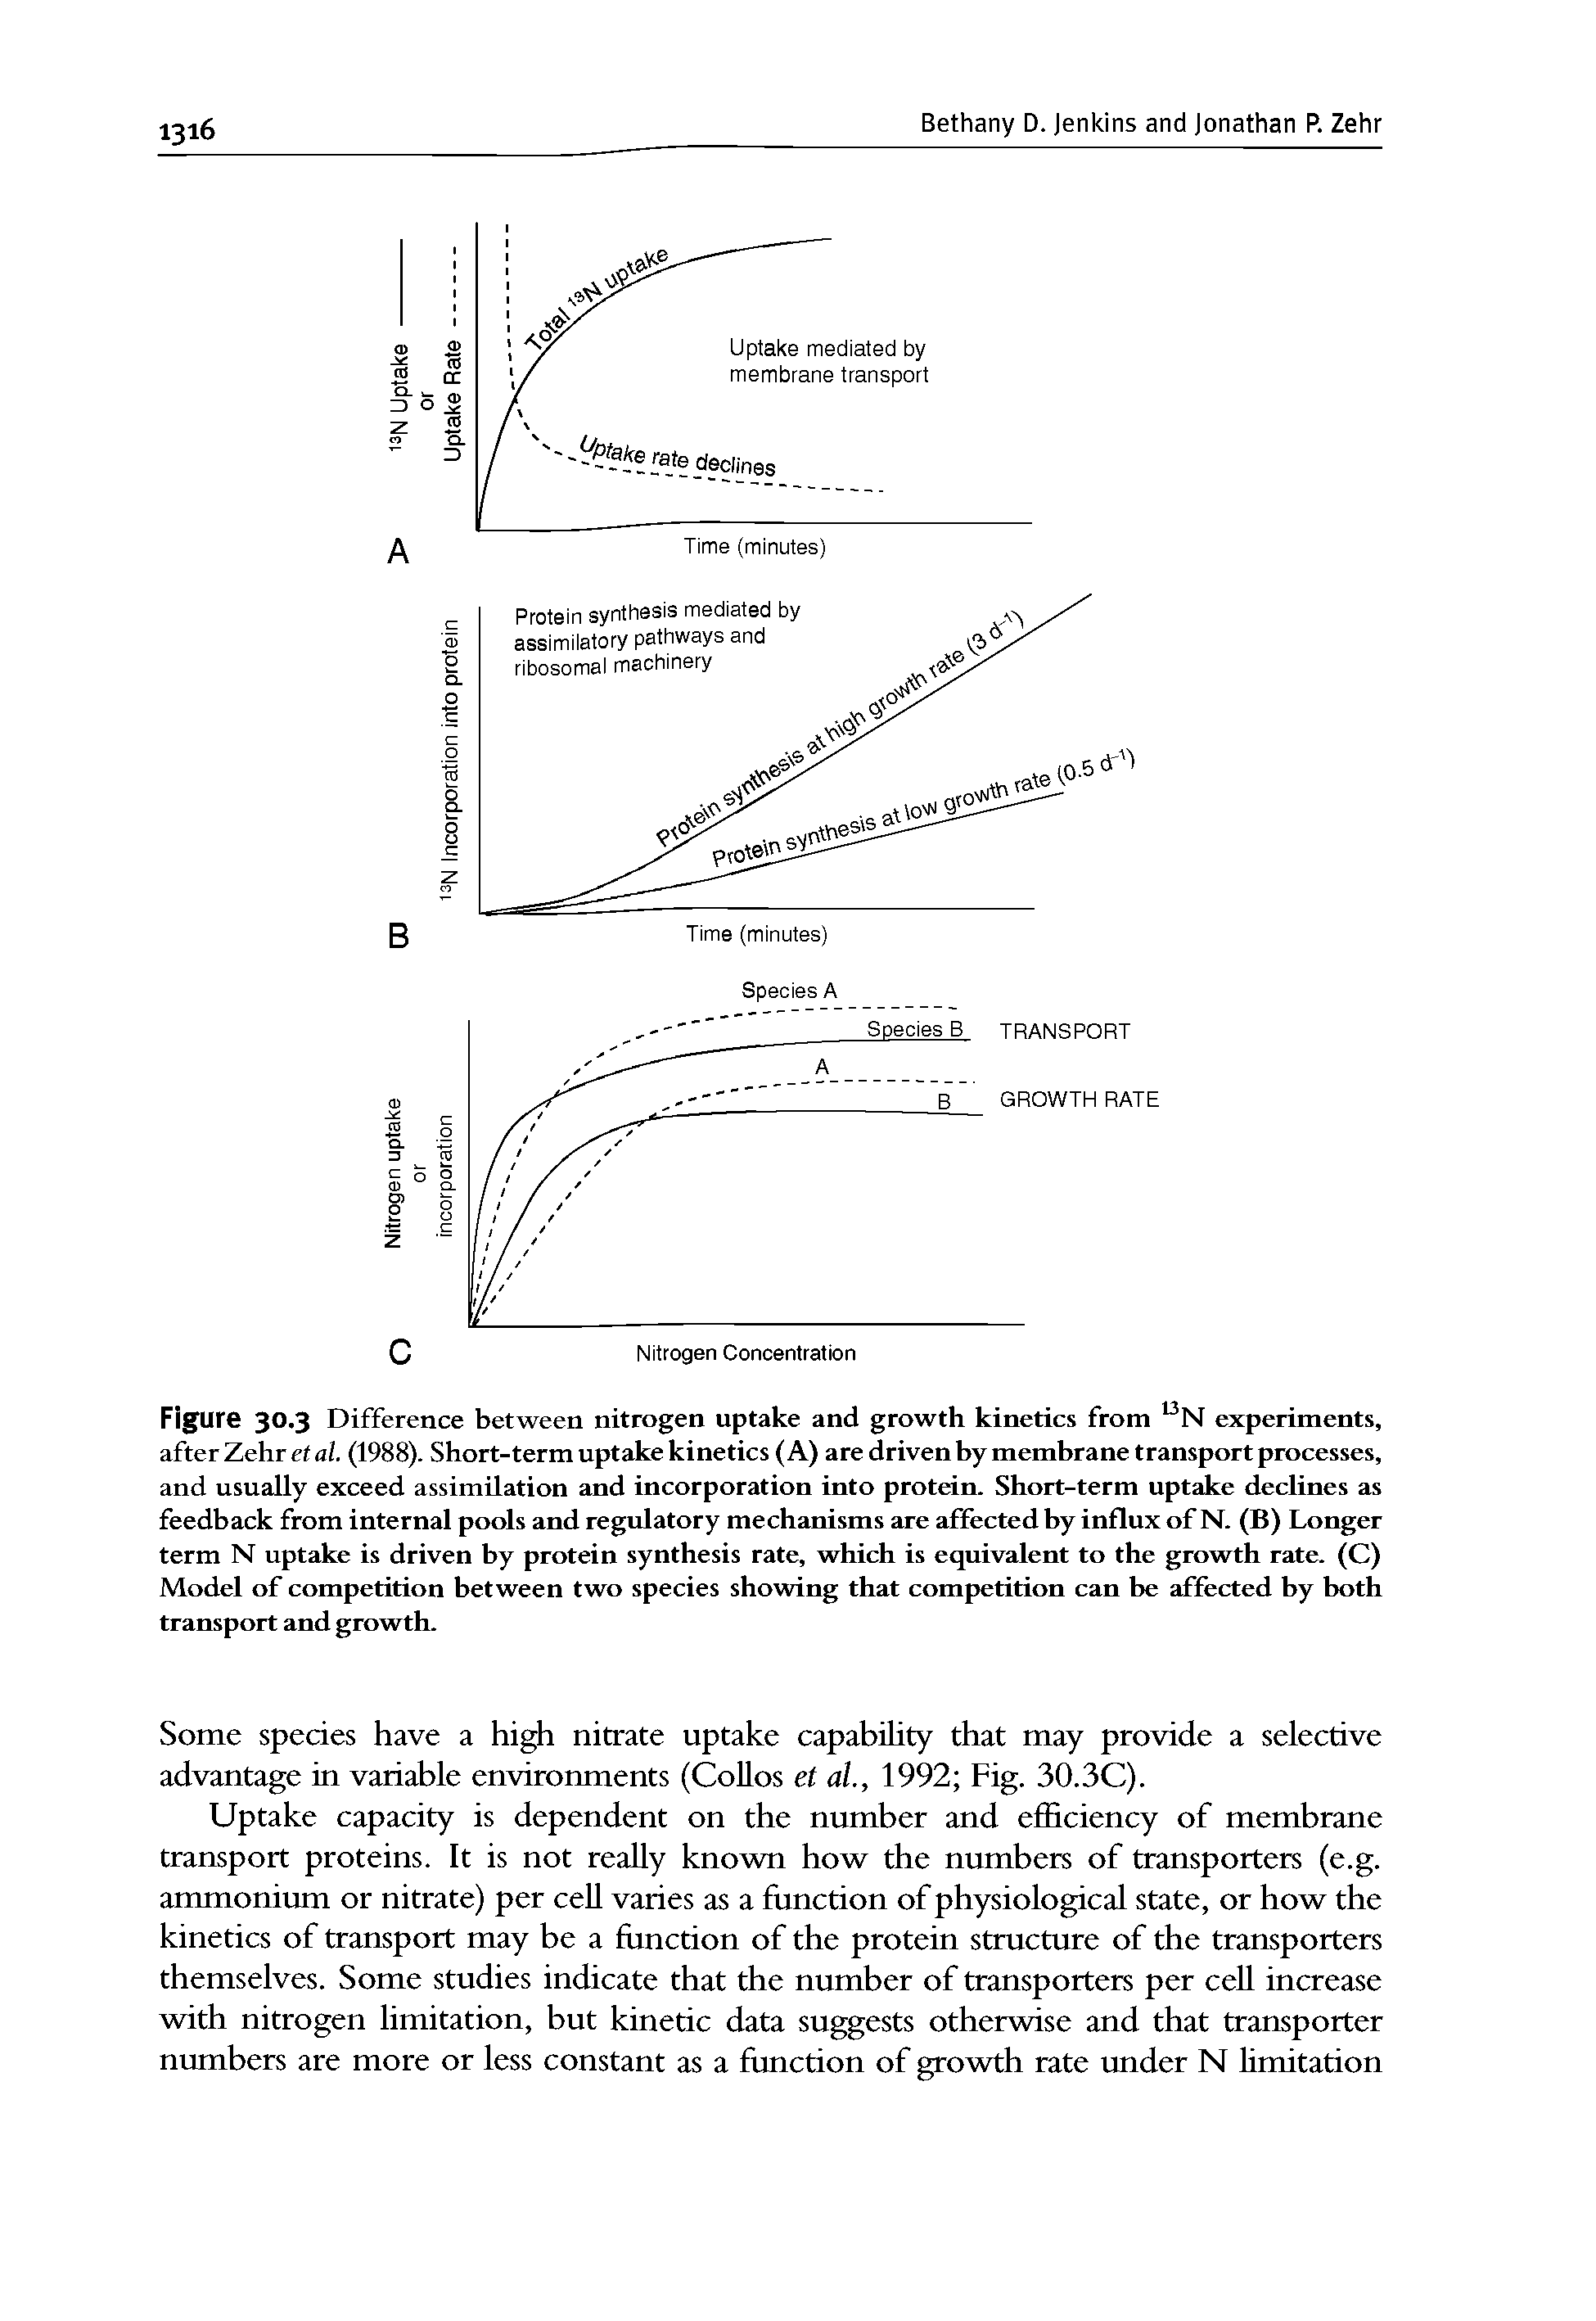 Figure 30.3 Difference between nitrogen uptake and growth kinetics from experiments, after Zehr et al. (1988). Short-term uptake kinetics (A) are driven by membrane transport processes, and usually exceed assimilation and incorporation into protein. Short-term uptake declines as feedback from internal pools and regulatory mechanisms are affected by influx of N. (B) Longer term N uptake is driven by protein synthesis rate, which is equivalent to the growth rate. (C) Model of competition between two species showing that competition can be affected by both transport and growth.